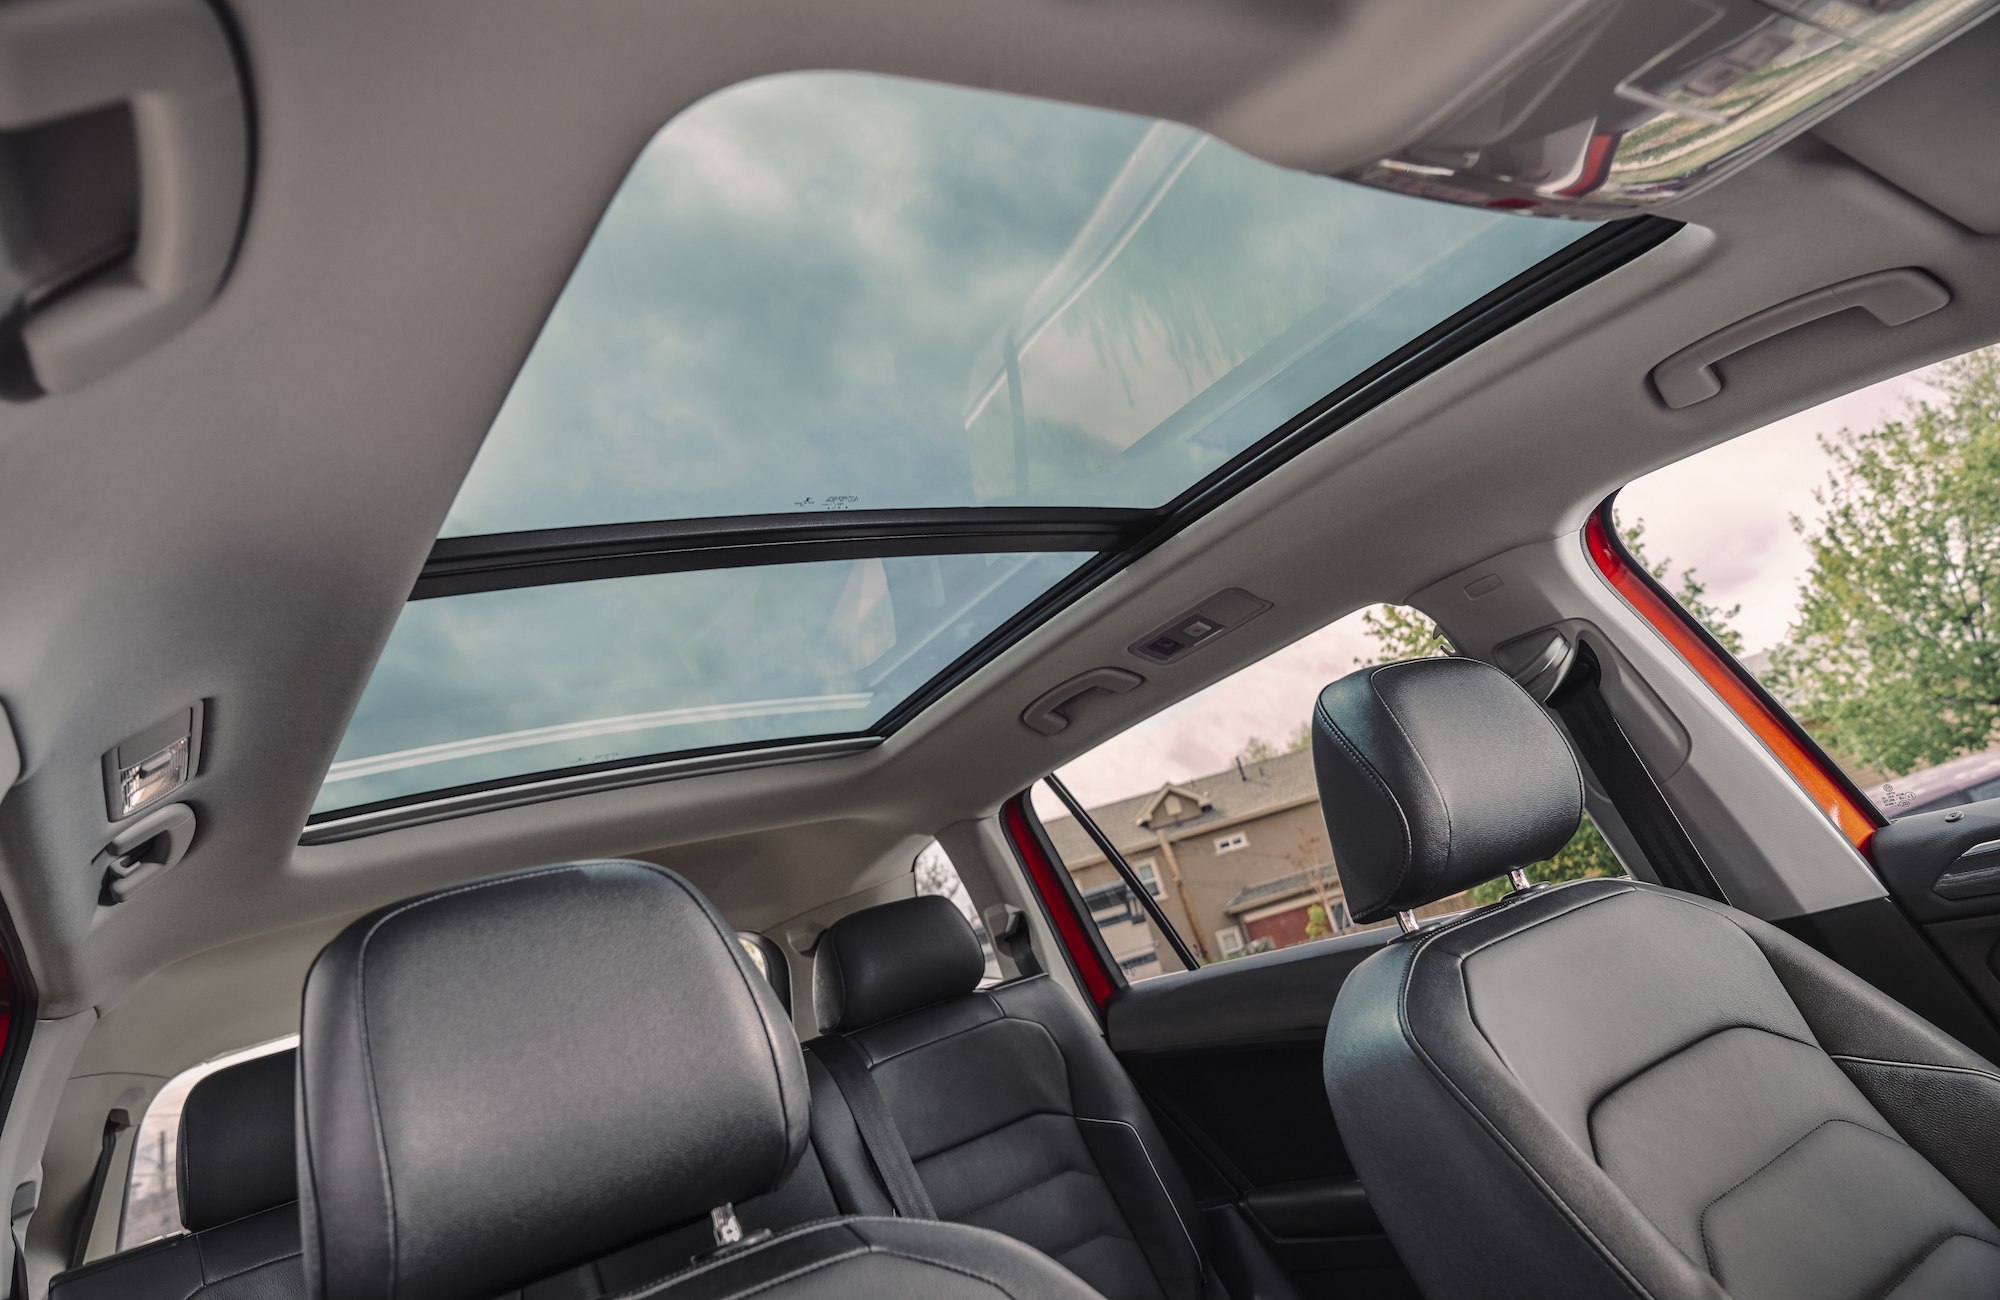 A panoramic sunroof on a 2020 Volkswagen Tiguan